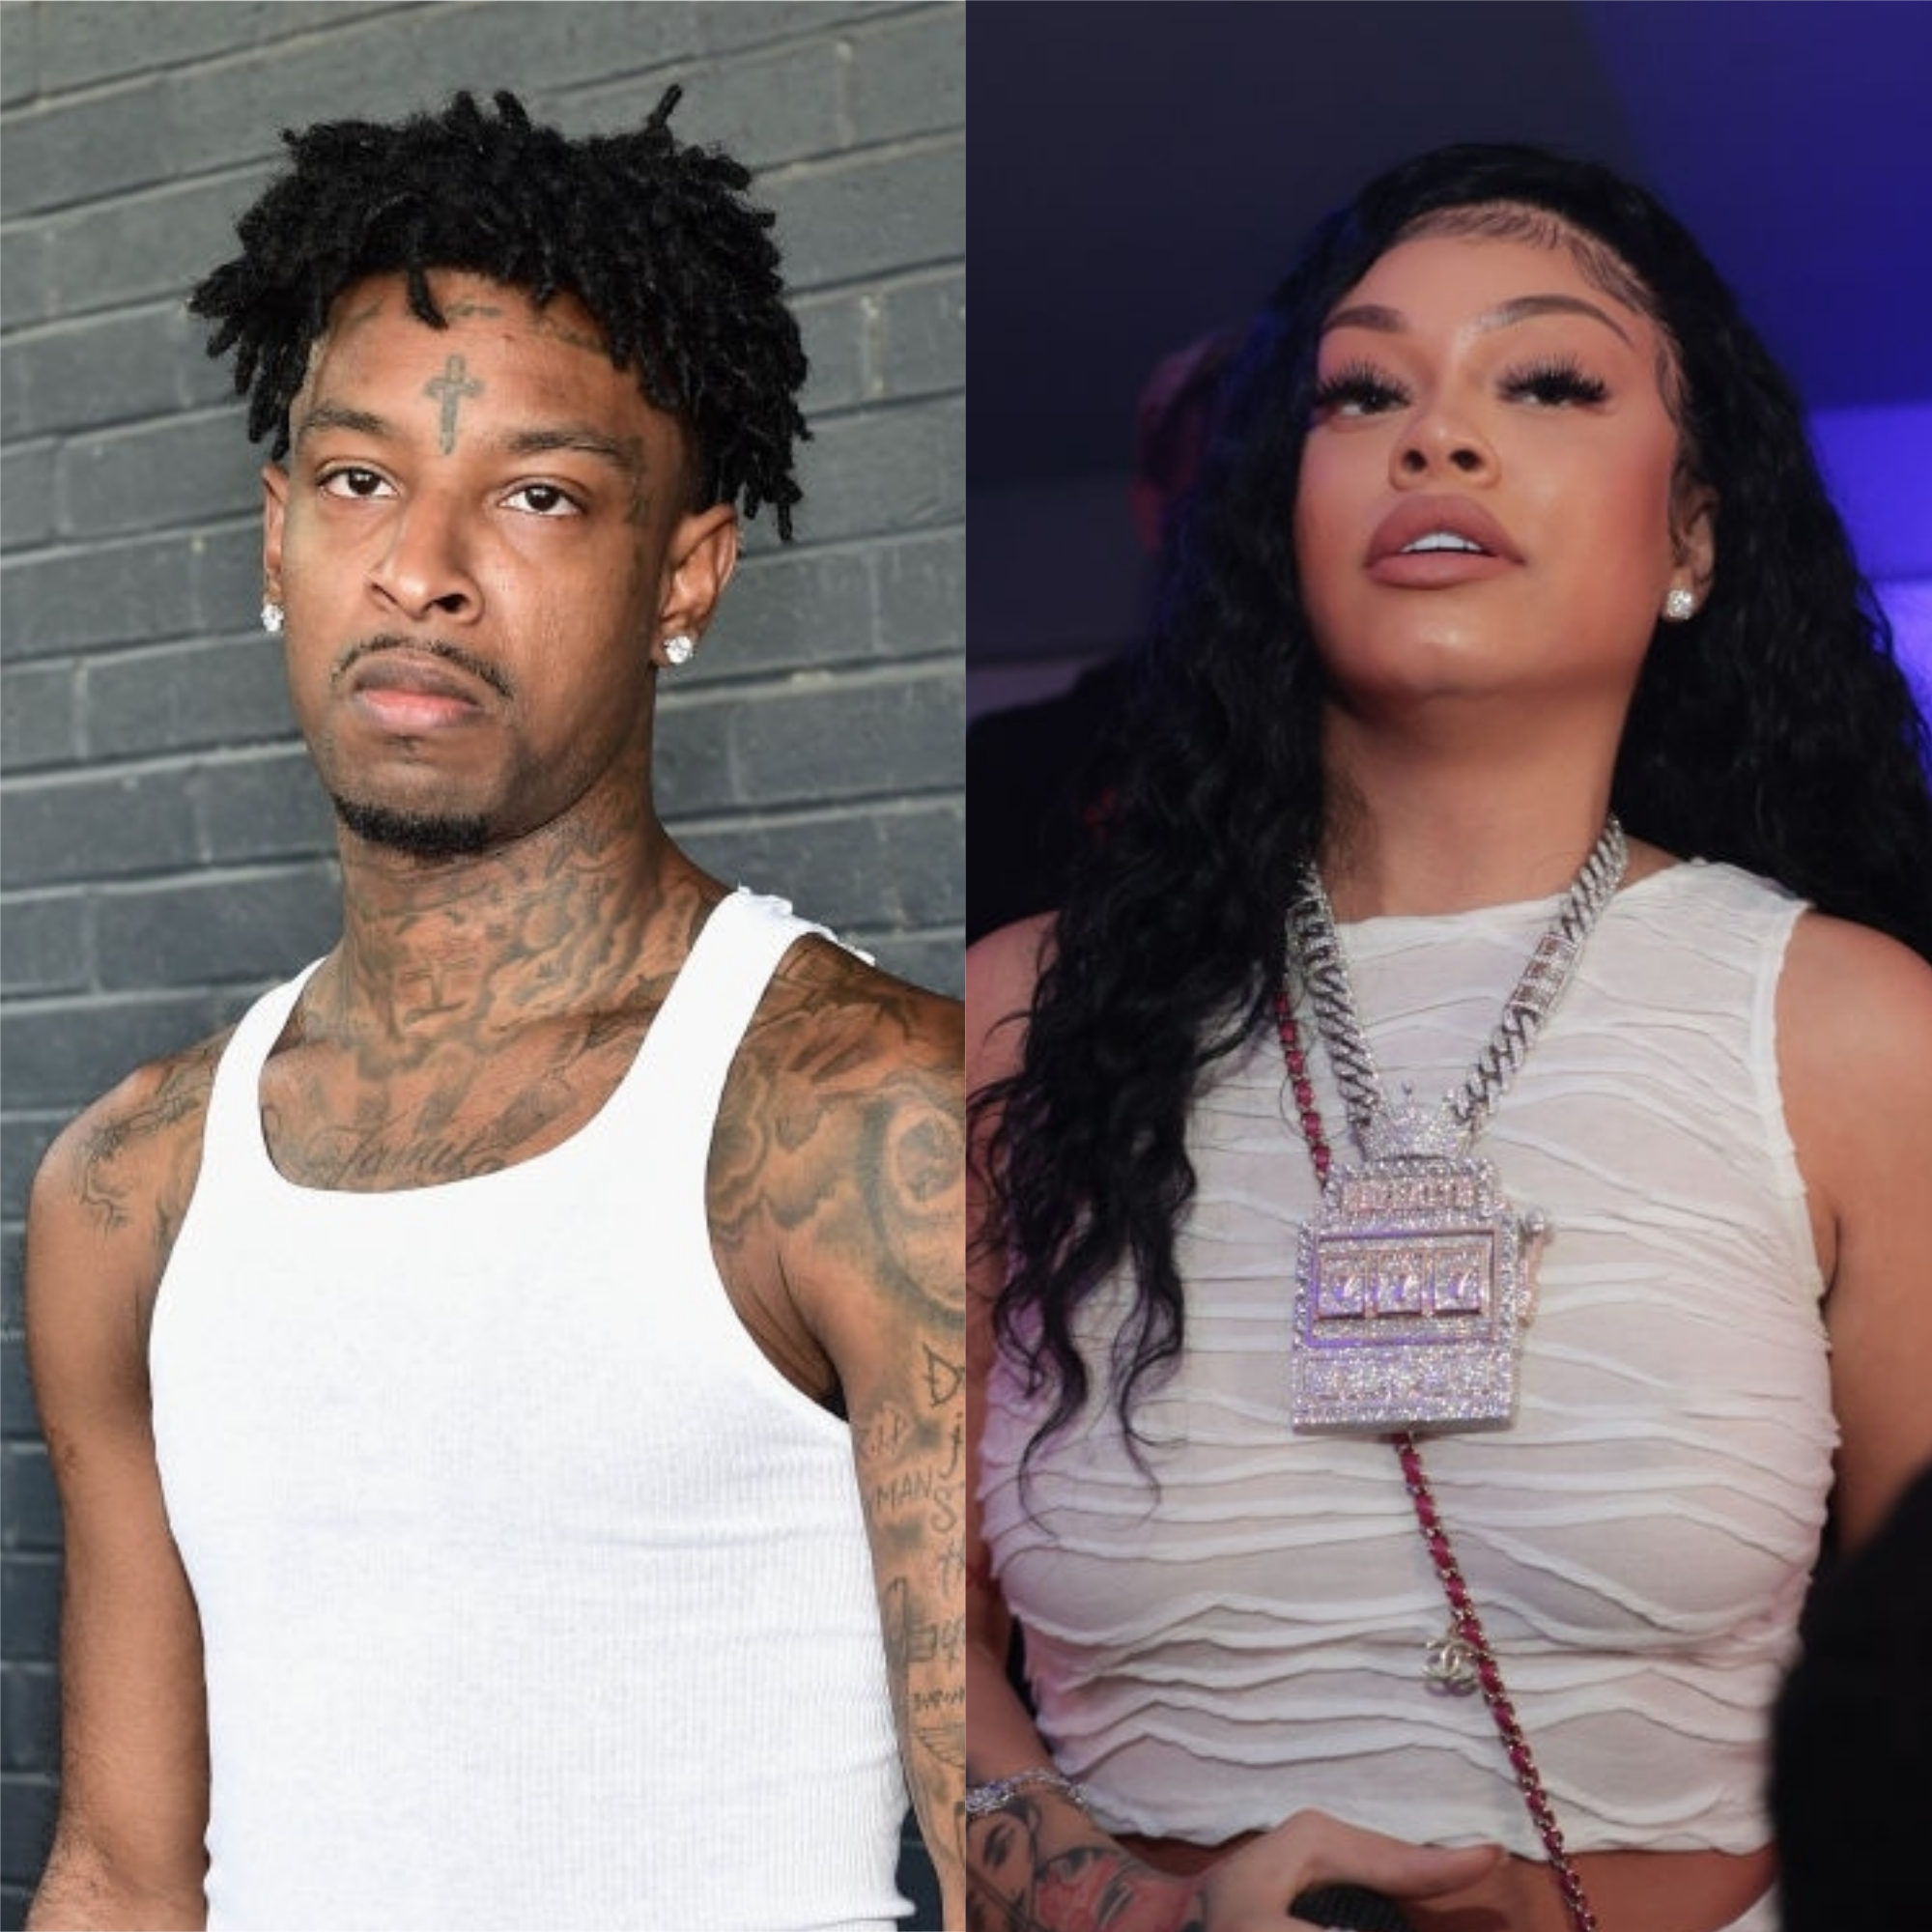 21 Savage is about to Rip her out the plastic but that relationship ain't  BRAND NEW‼️👀 ALLEGEDLY Latto has been his #sidechick for a…